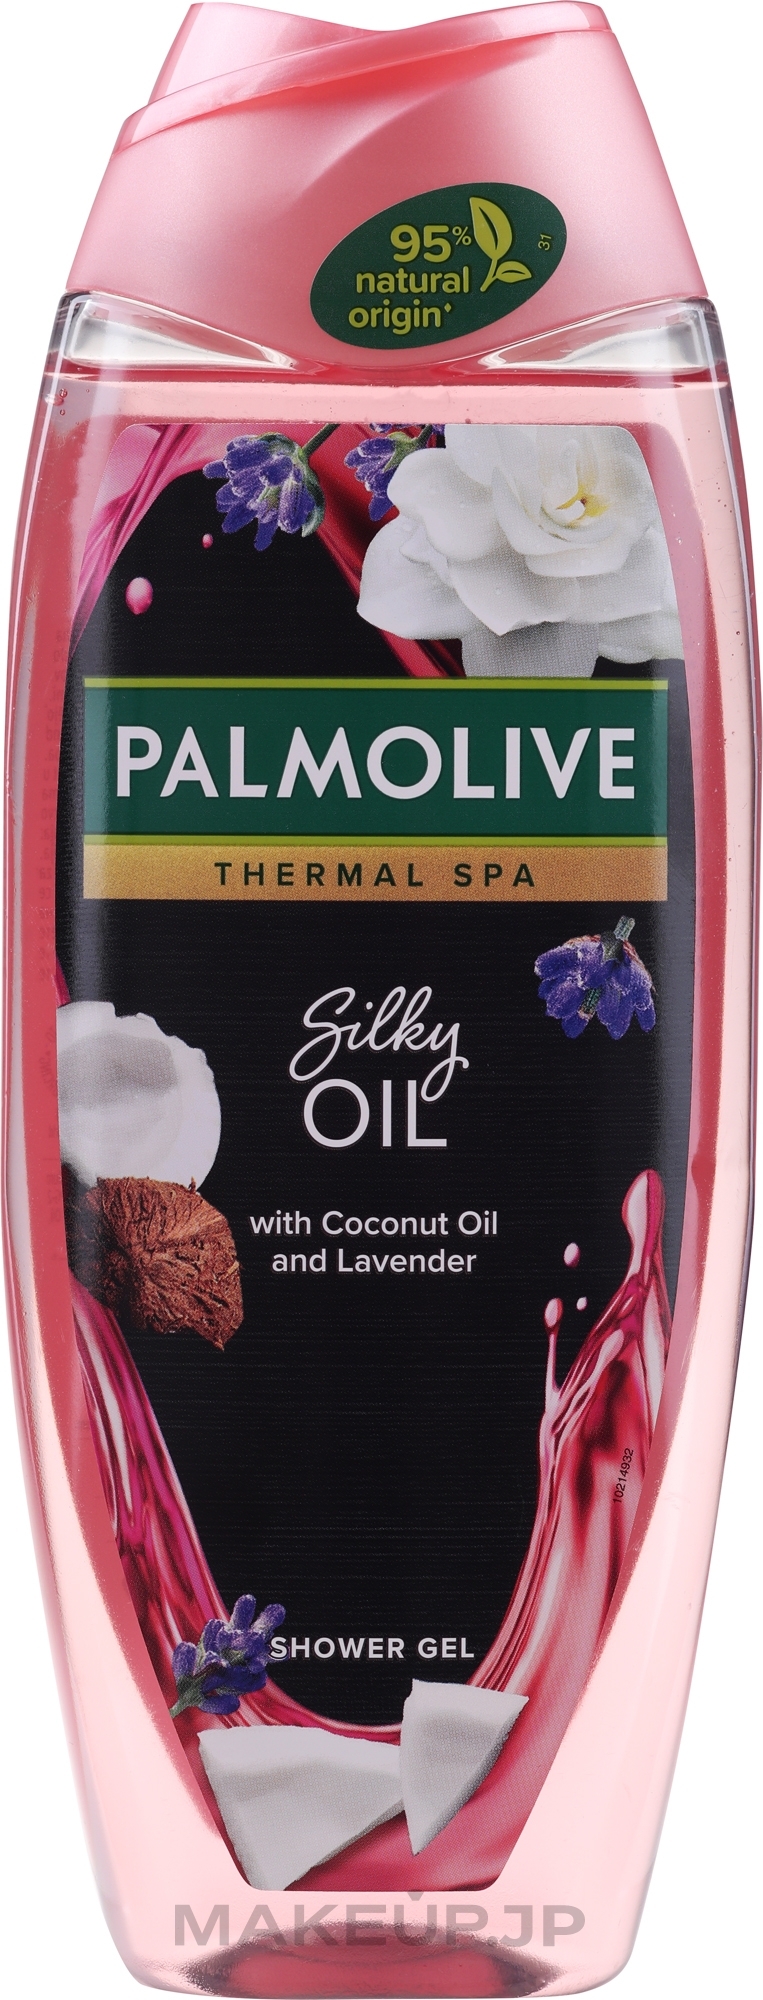 Shower Gel - Palmolive Thermal Spa Silky Oil Coconut Oil and Lavender — photo 500 ml